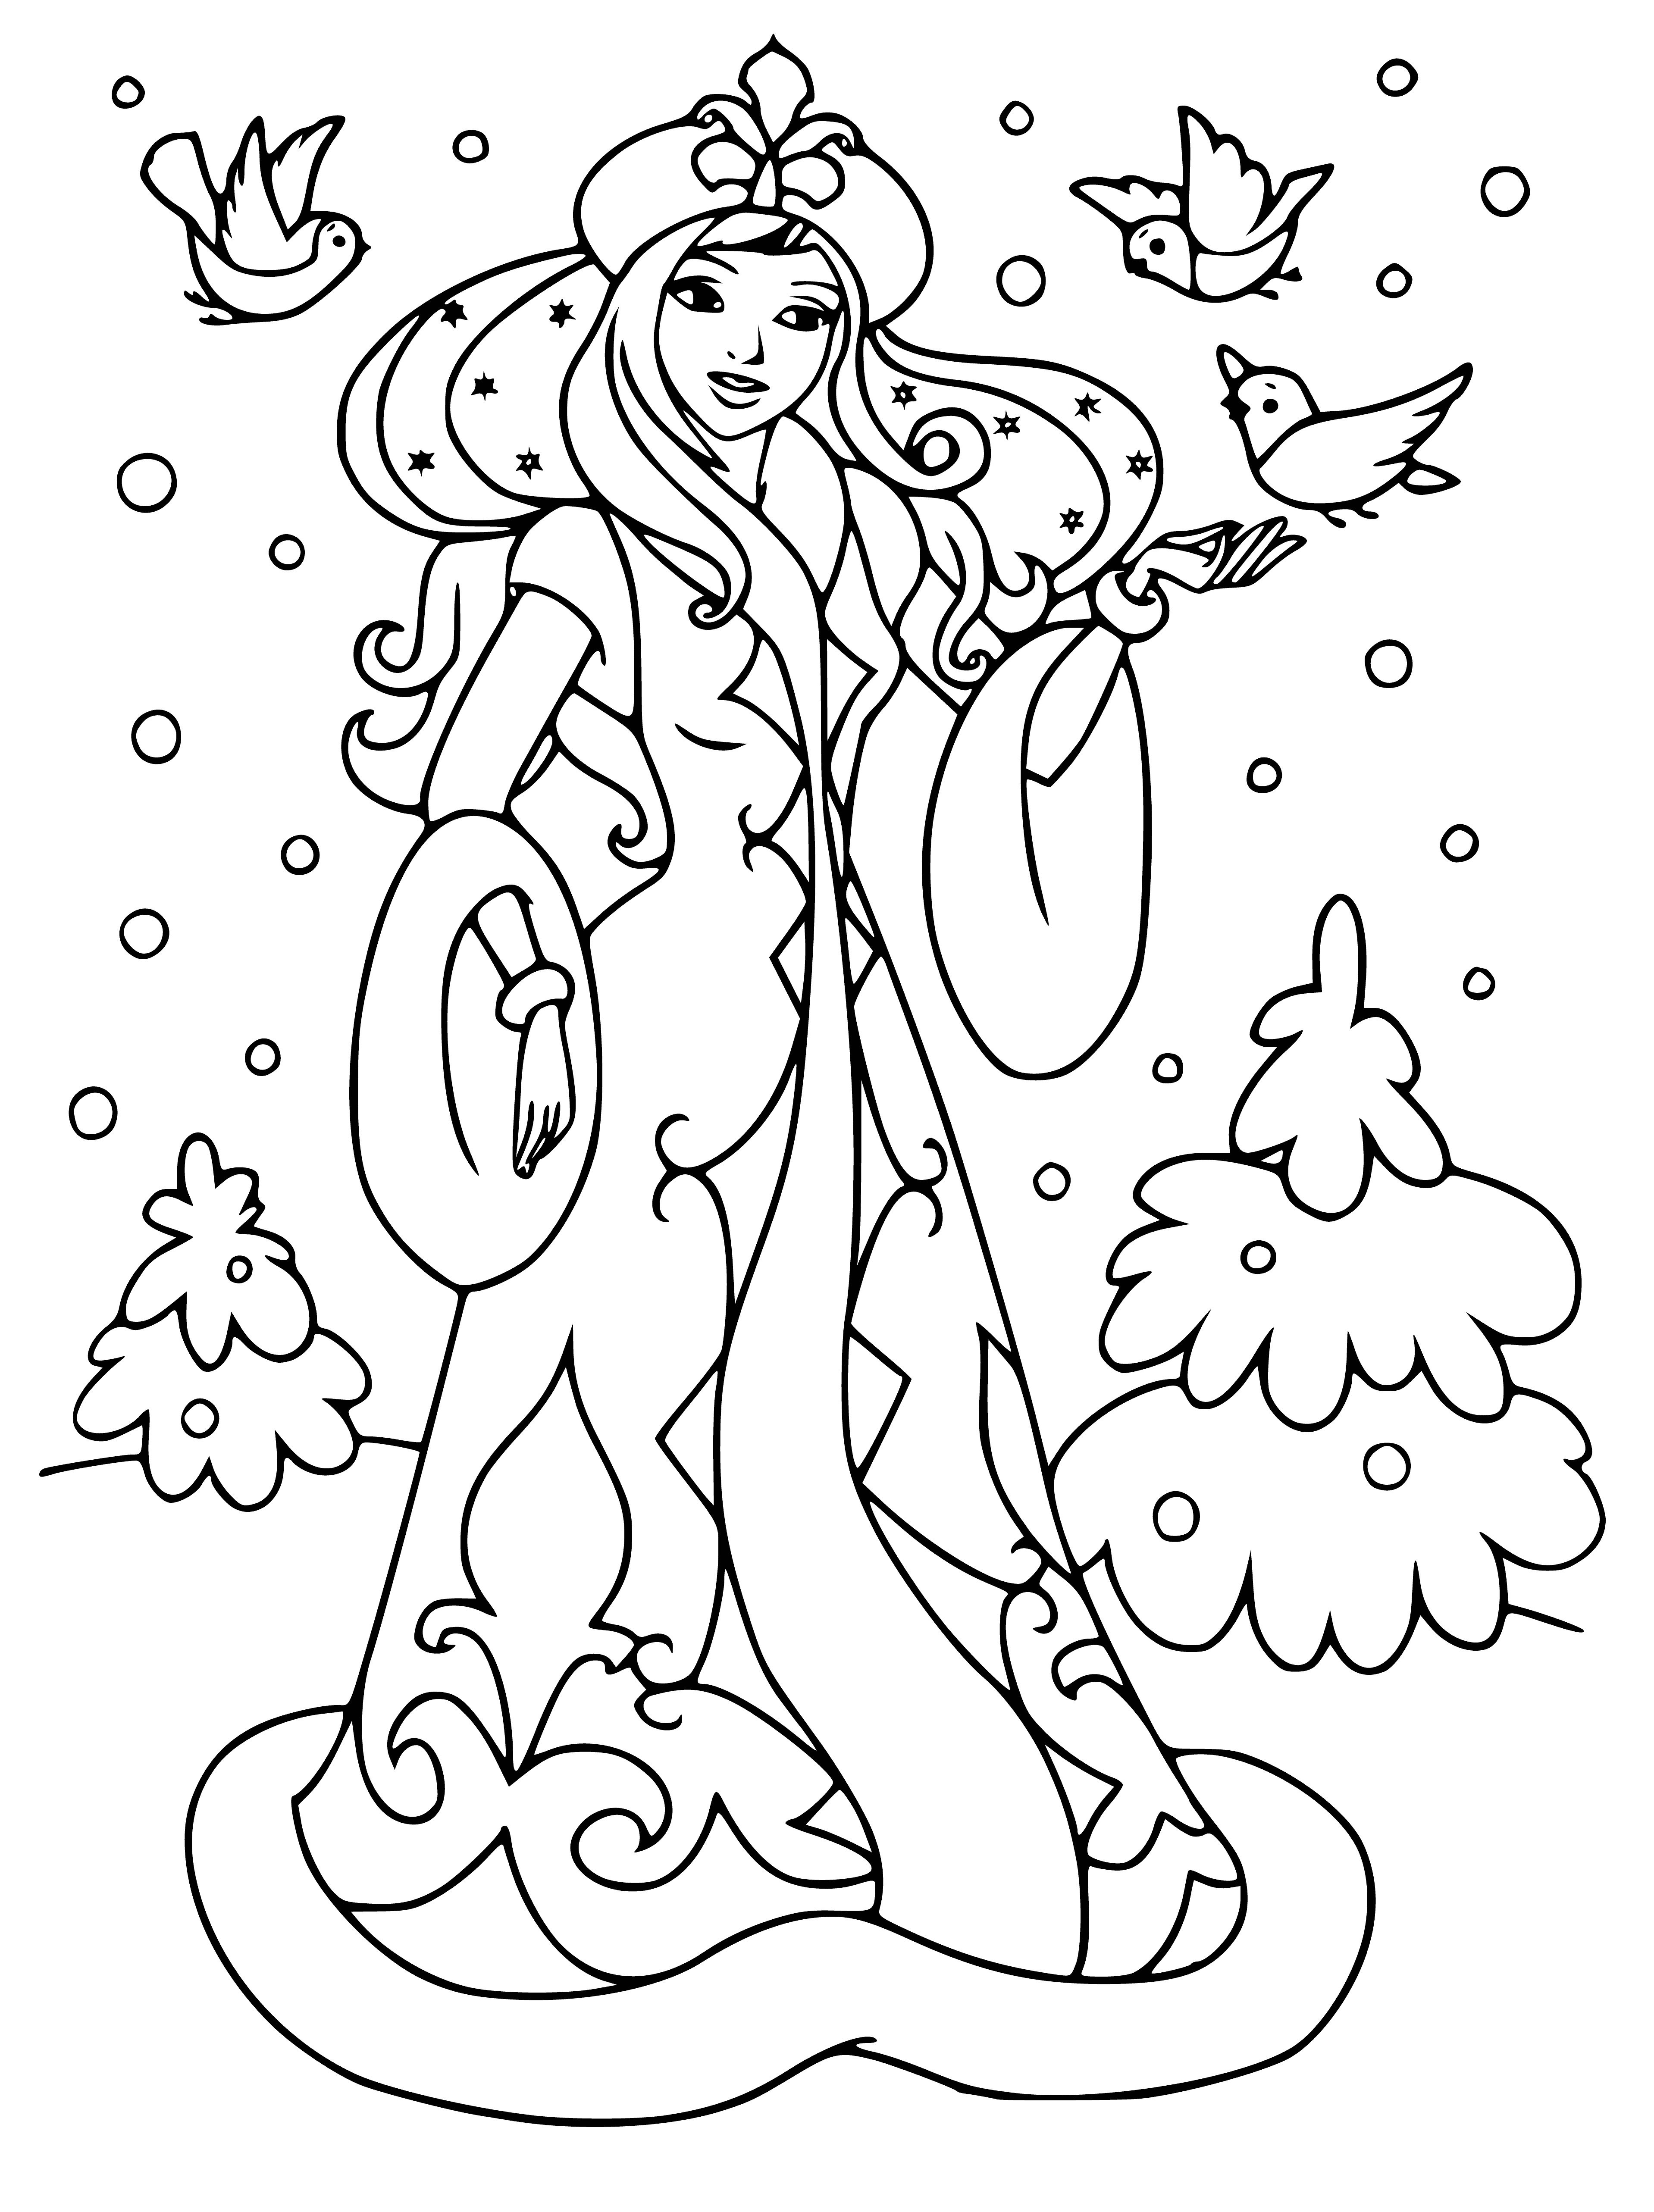 coloring page: Snow Maiden stands in winter forest in white dress, scarf & hair. Blue eyes, holding white candle in right hand - a real winter fairy-tale!